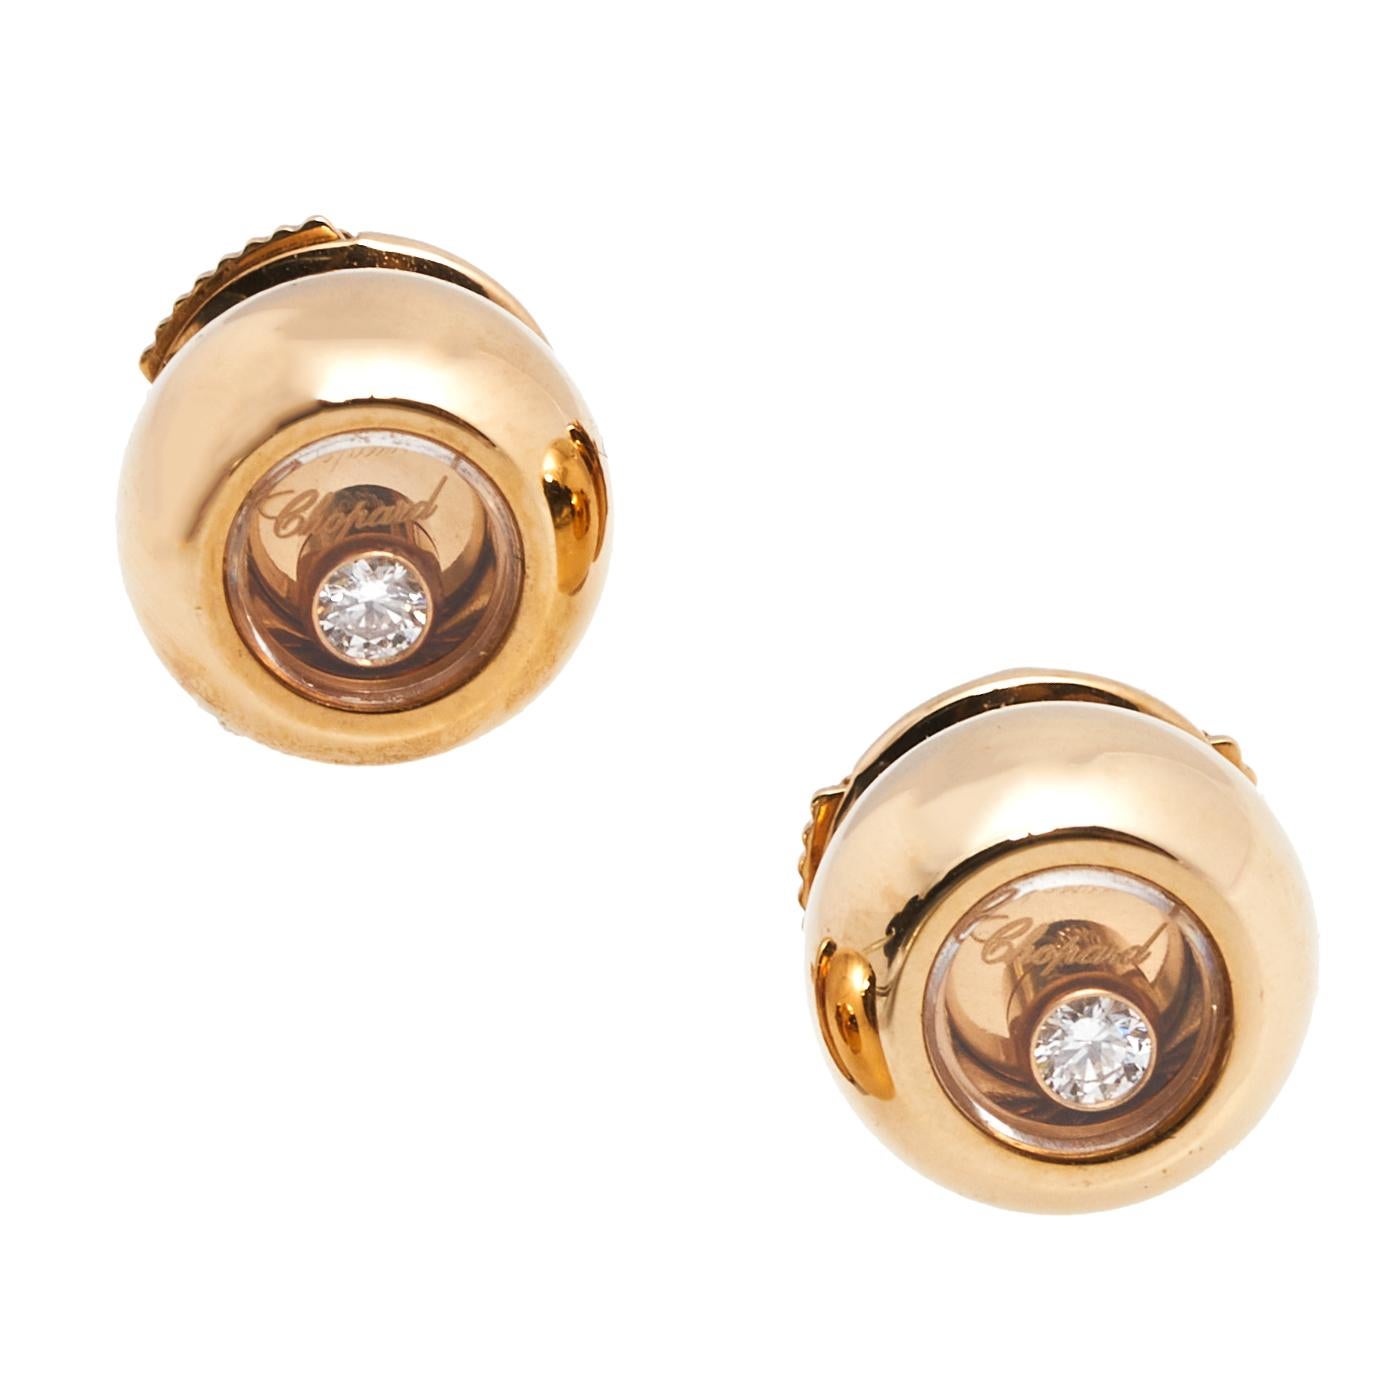 These precious earrings from Chopard tug at one's heartstrings in the sweetest way. Sculpted from 18k rose gold and designed with a single diamond trapped within each stud, the pair is lovely. Be sure to try them with swept hair and a matching